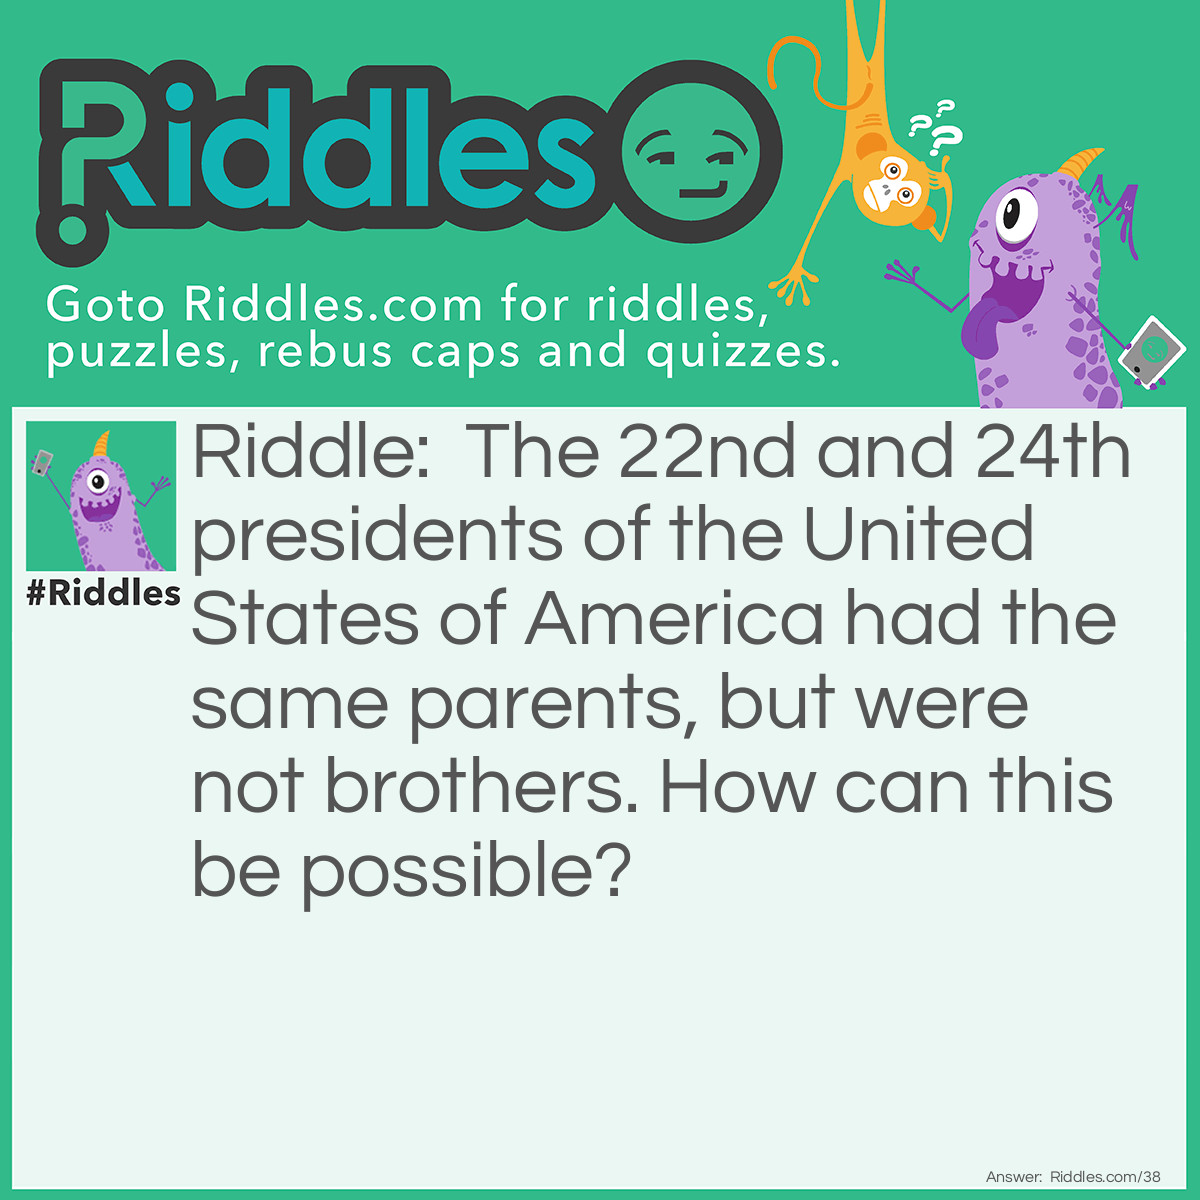 Riddle: The 22nd and 24th presidents of the United States of America had the same parents, but were not brothers. How can this be possible? Answer: They were the same man. Grover Cleveland served two terms as president of the United States, but the terms were not consecutive.